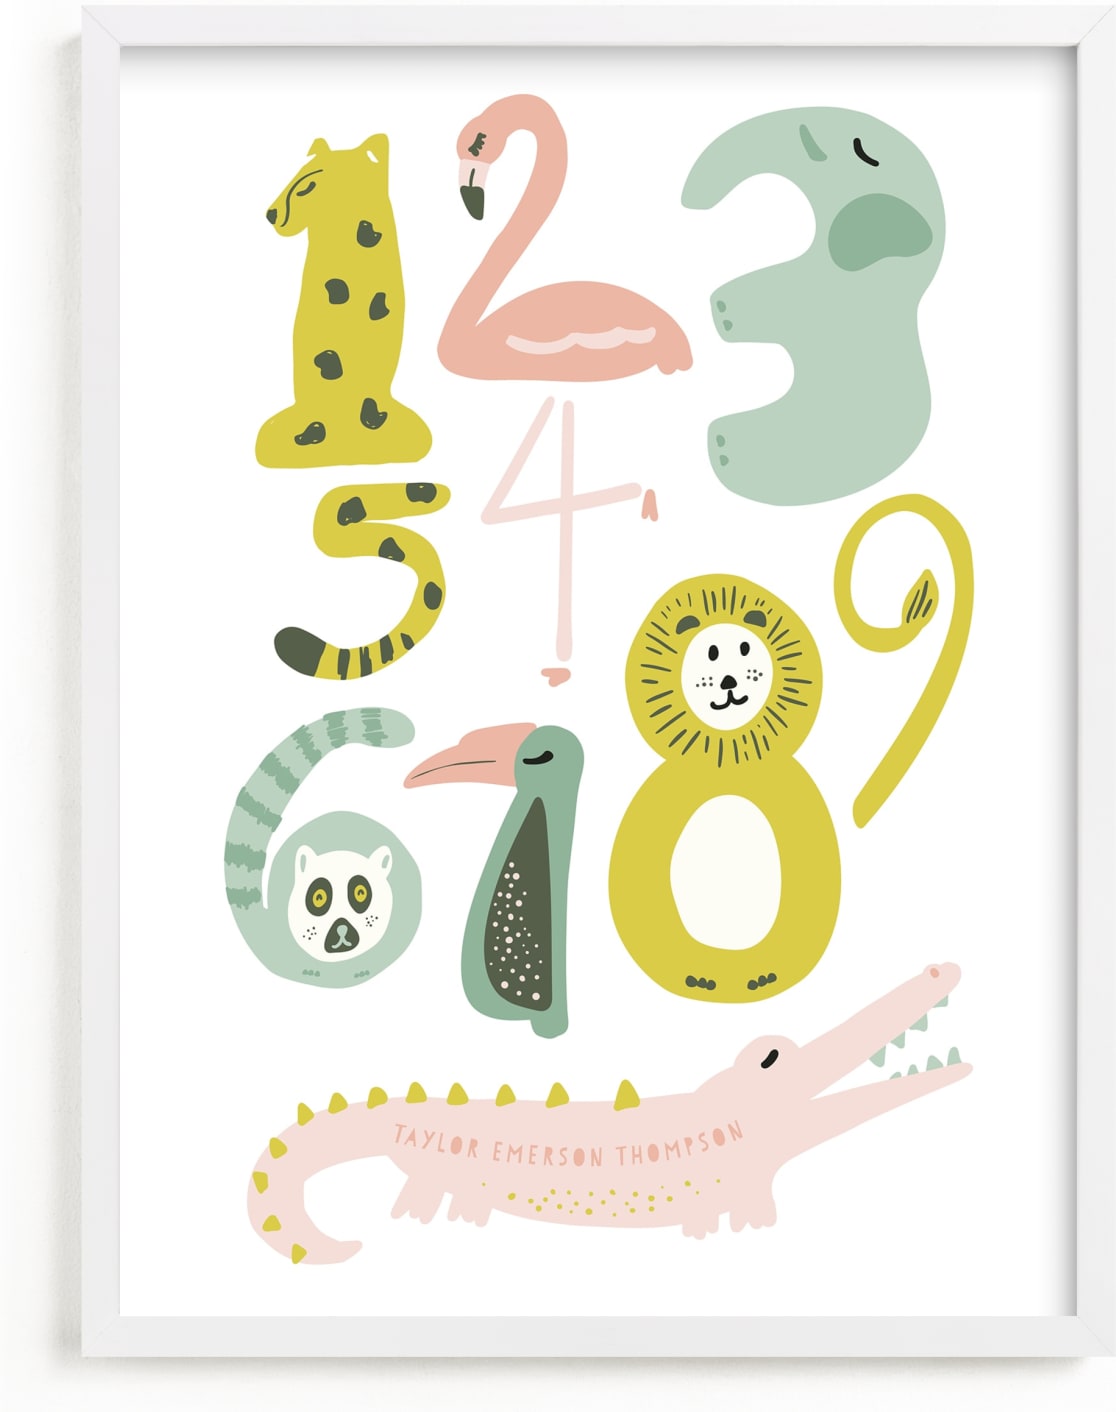 This is a colorful personalized art for kid by Jenna Holcomb called Safari Friends Numerals.